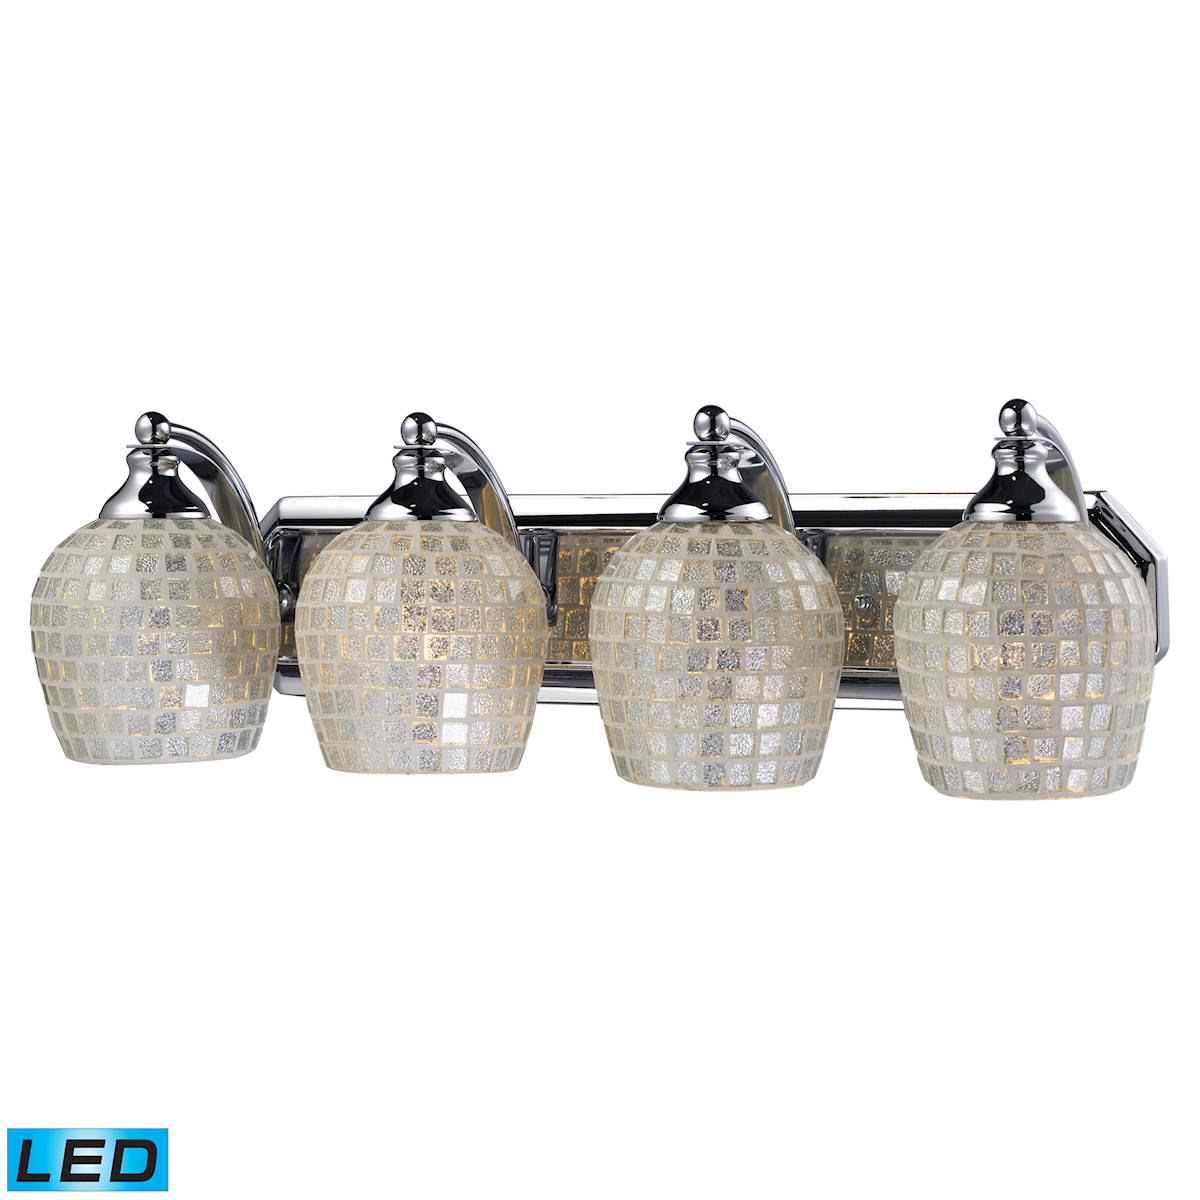 4 Light Vanity in Polished Chrome and Silver Mosaic Glass - LED, 800 Lumens (3200 Lumens Total) With Full Scale